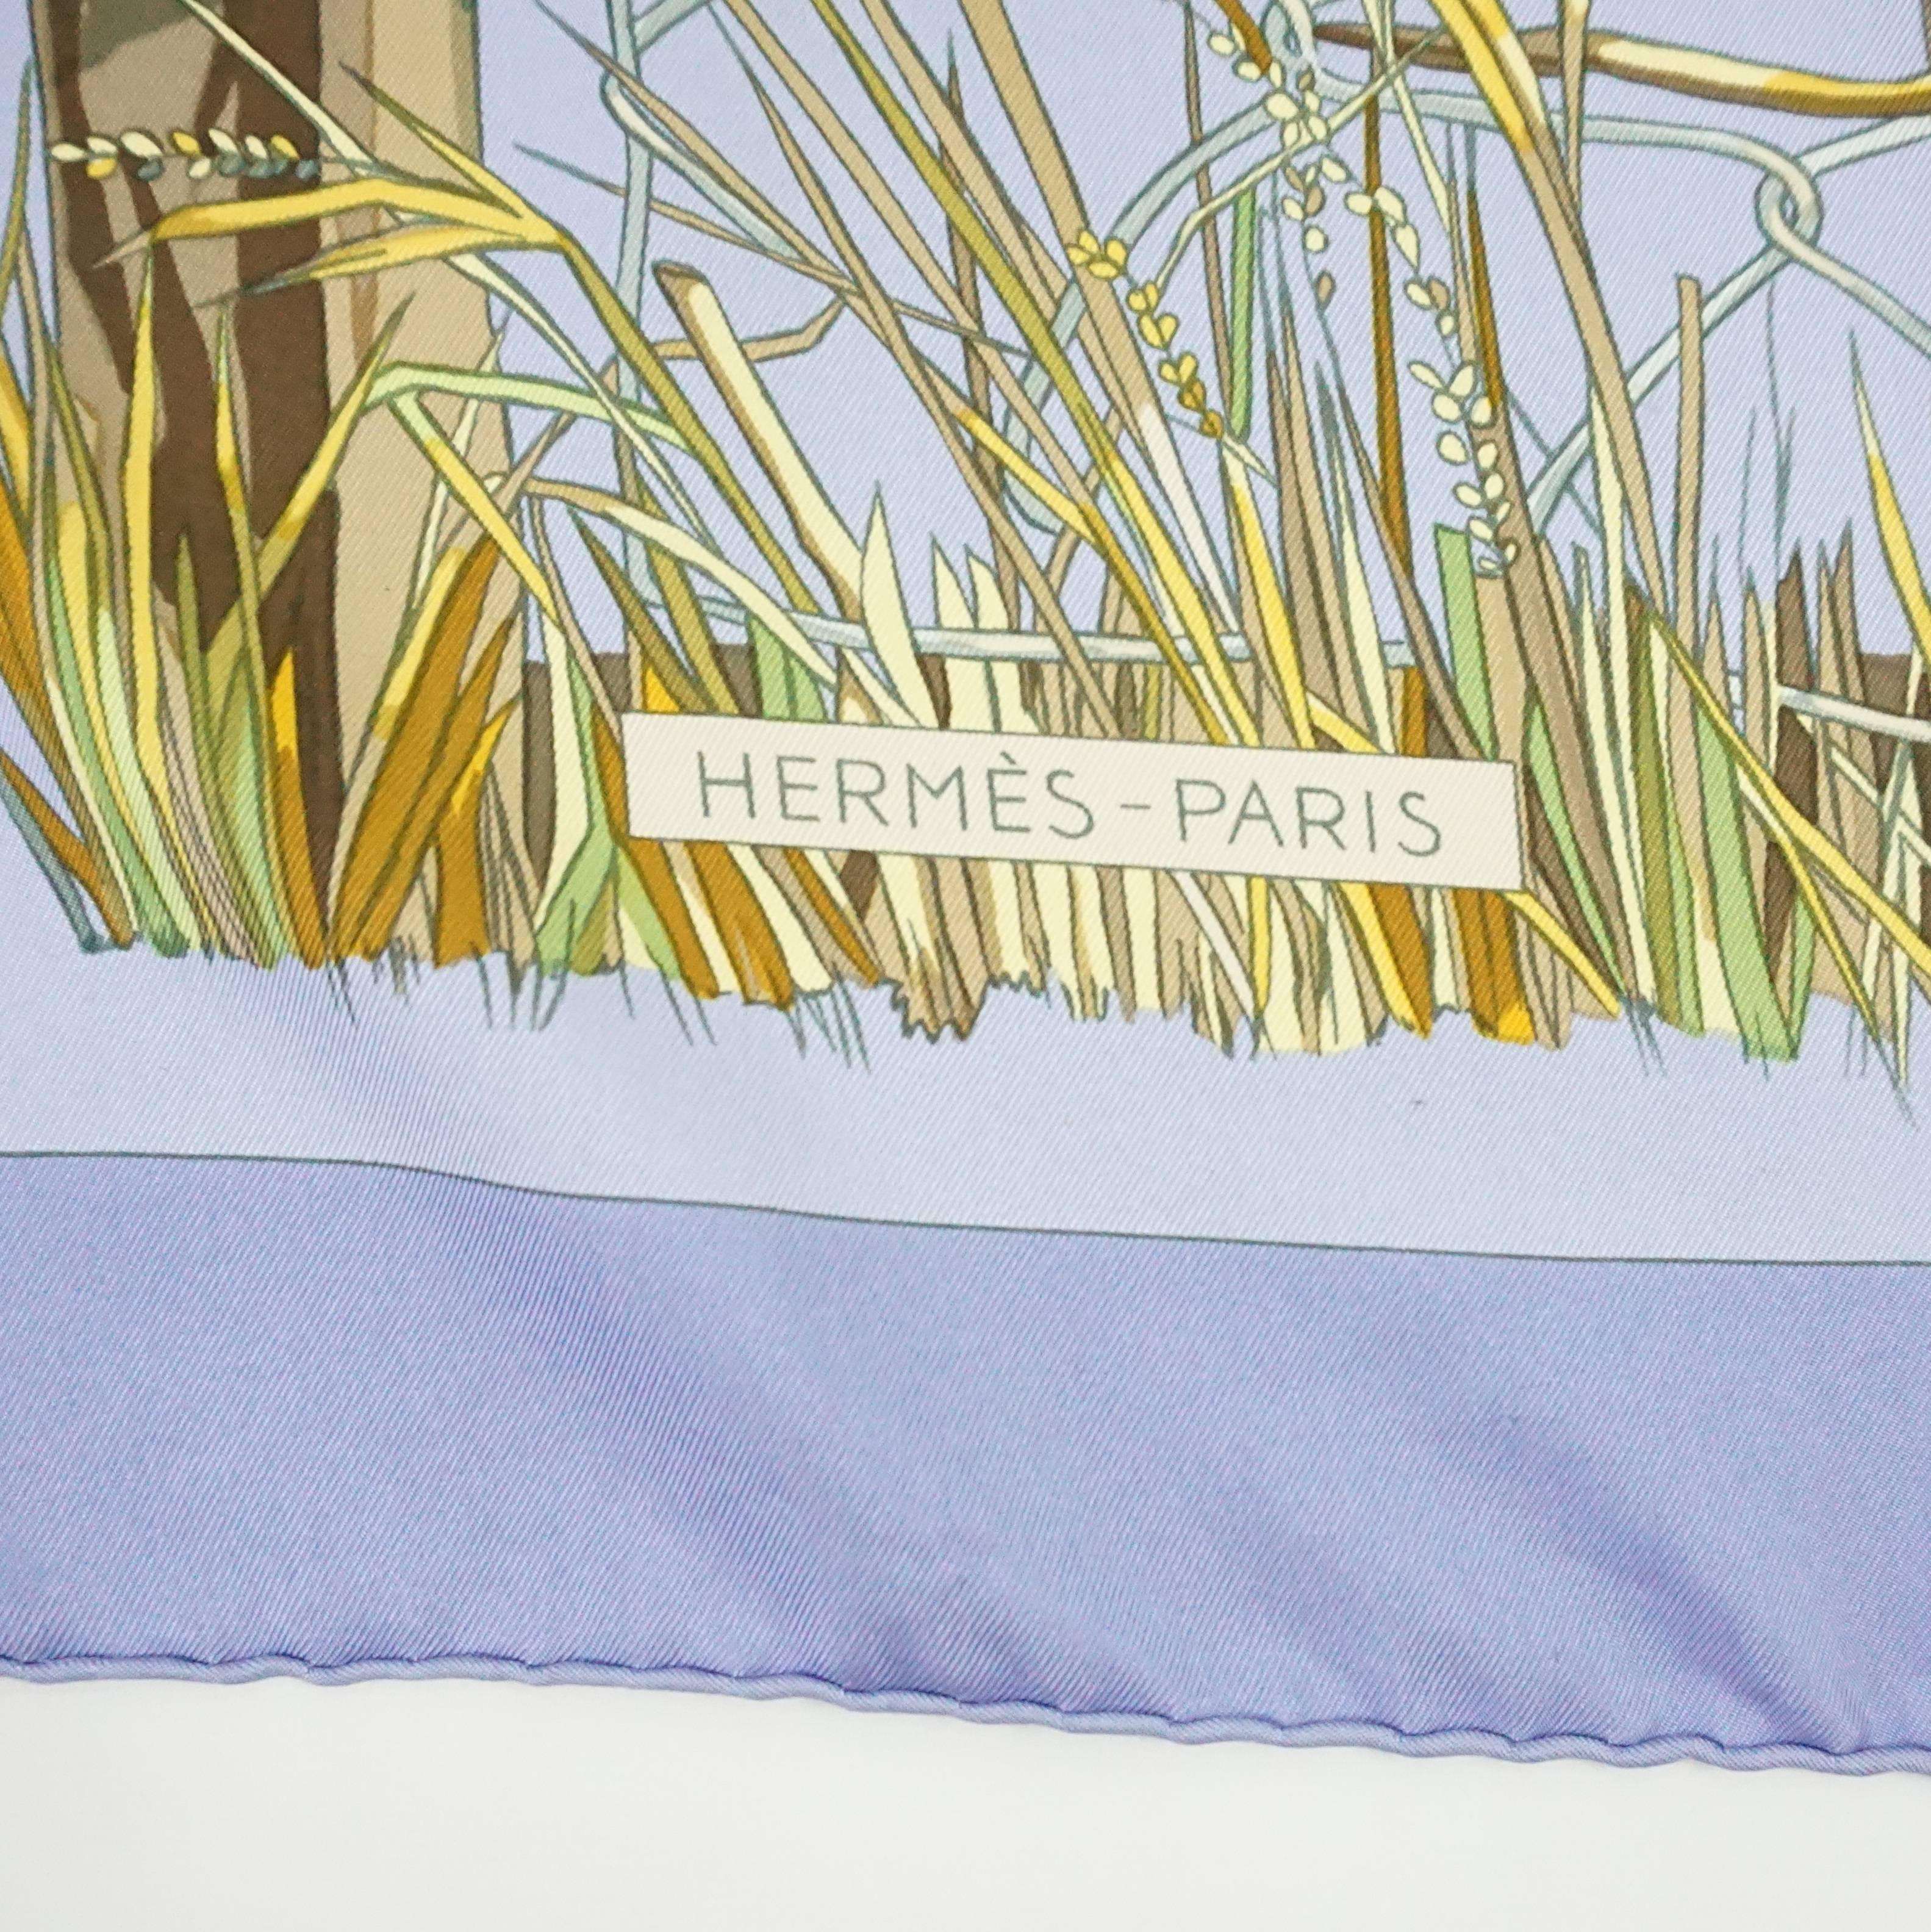 This Hermes silk scarf has mainly periwinkle on it with a lavender trim. The print is of a prairie-like fence with different motifs on it. It is by Francoise Heron and is titled, 